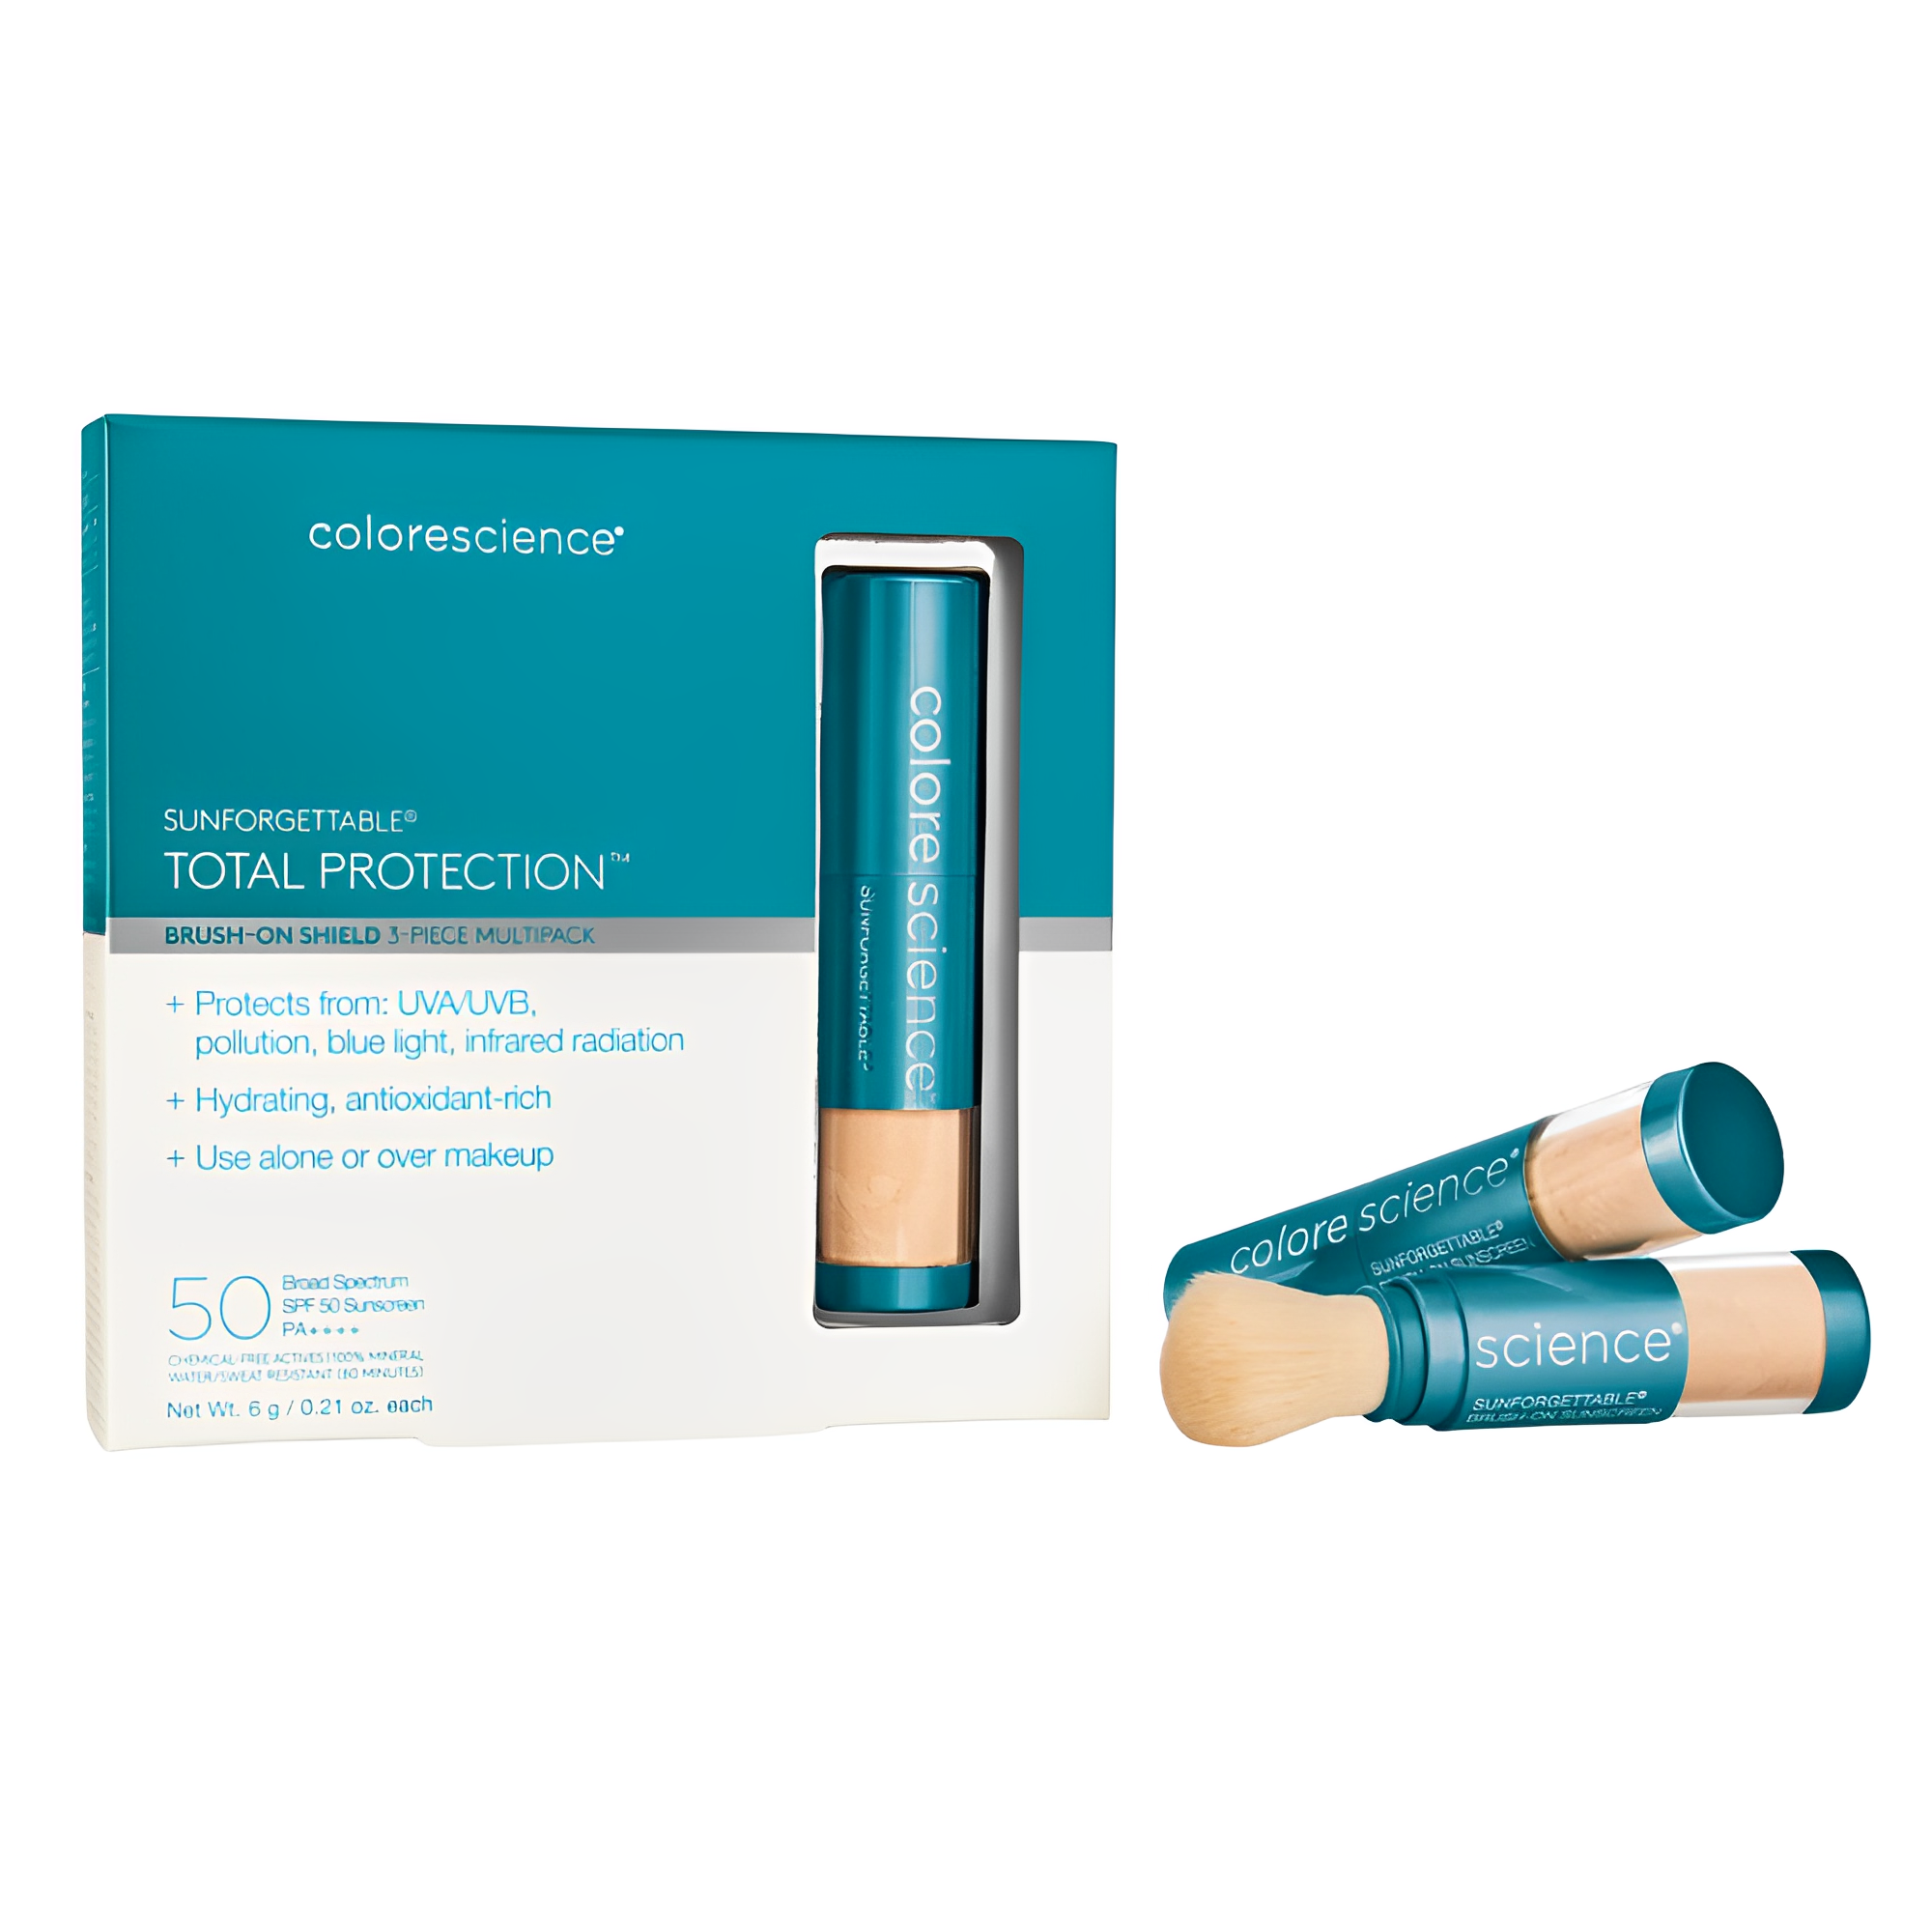 colorescience sunforgettable total protectiontm brush-on shield spf 50 multipack